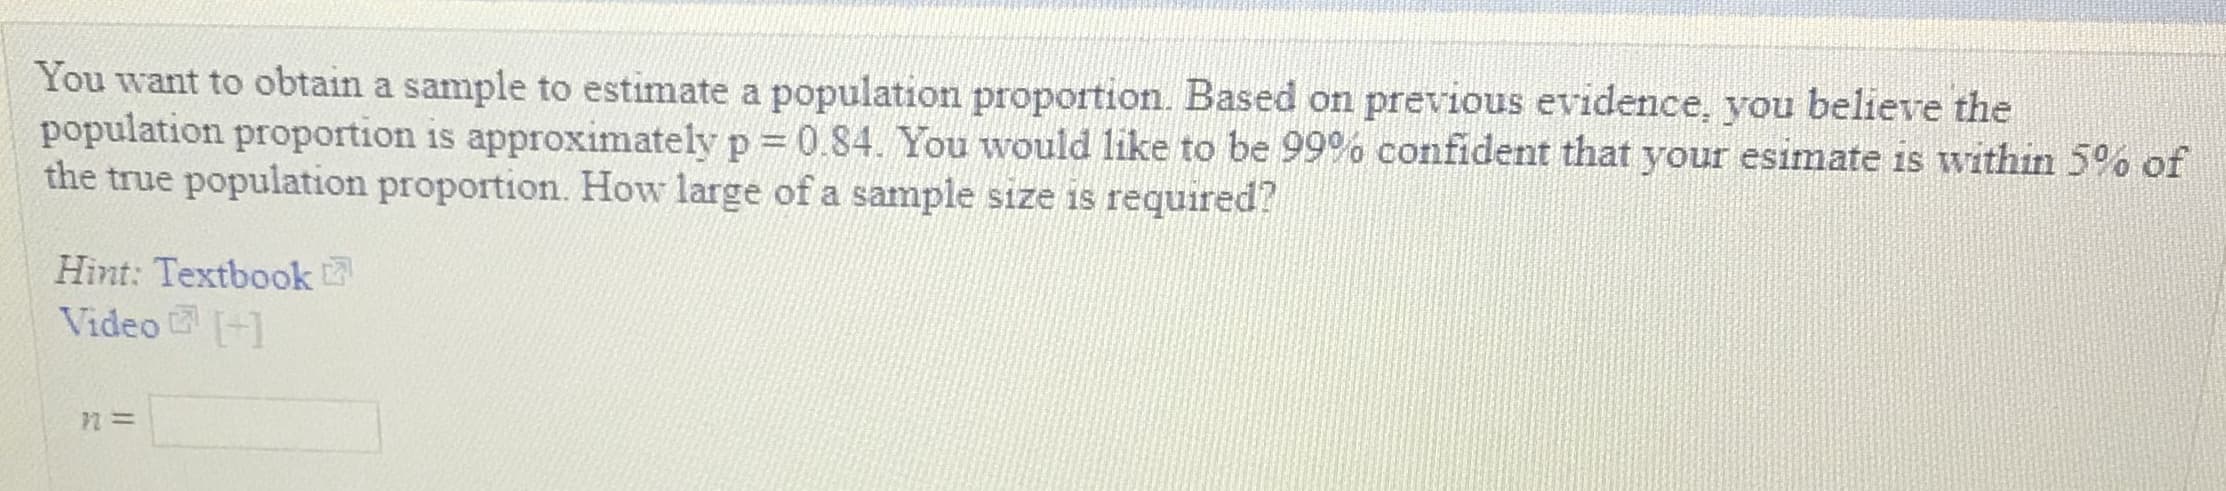 You want to obtain a sample to estimate a population proportion. Based on previous evidence, you believe the
population proportion is approximately p :: 0.84. You would like to be 99% confident that your esimate is within 5% of
ue population proportion. How large of a sample size is required?
Hint: Textbook
Video1
